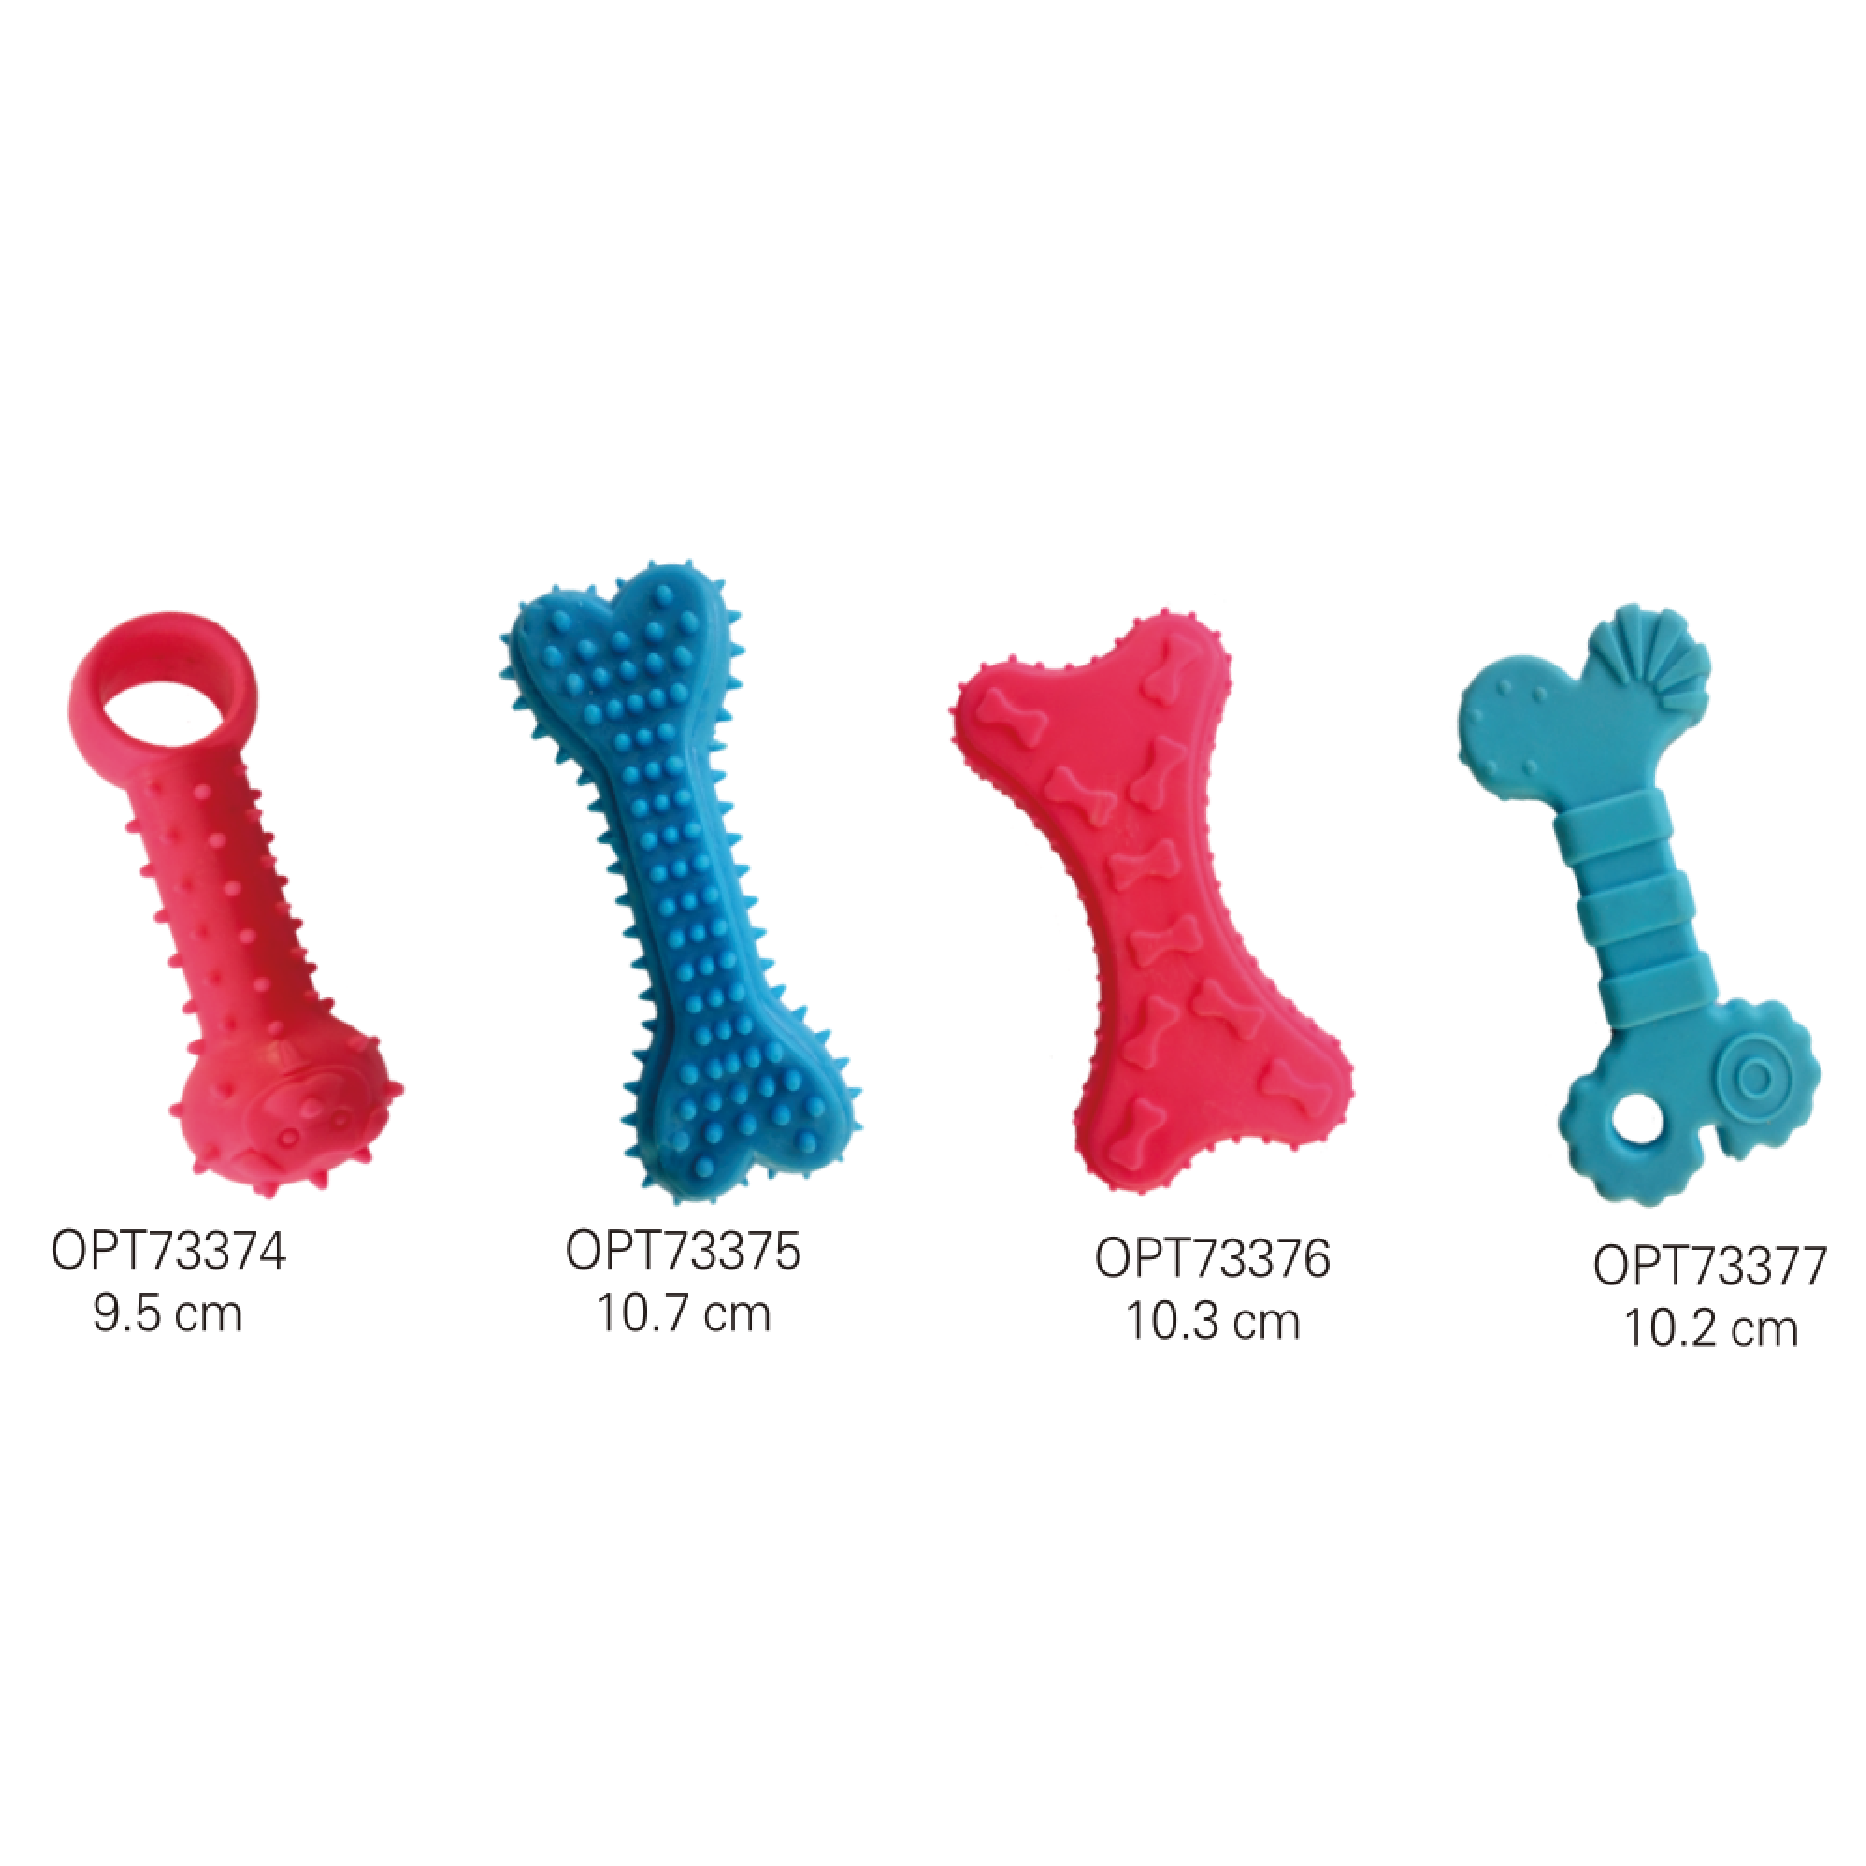 OPT73374-OPT73377 Dog toy rubber